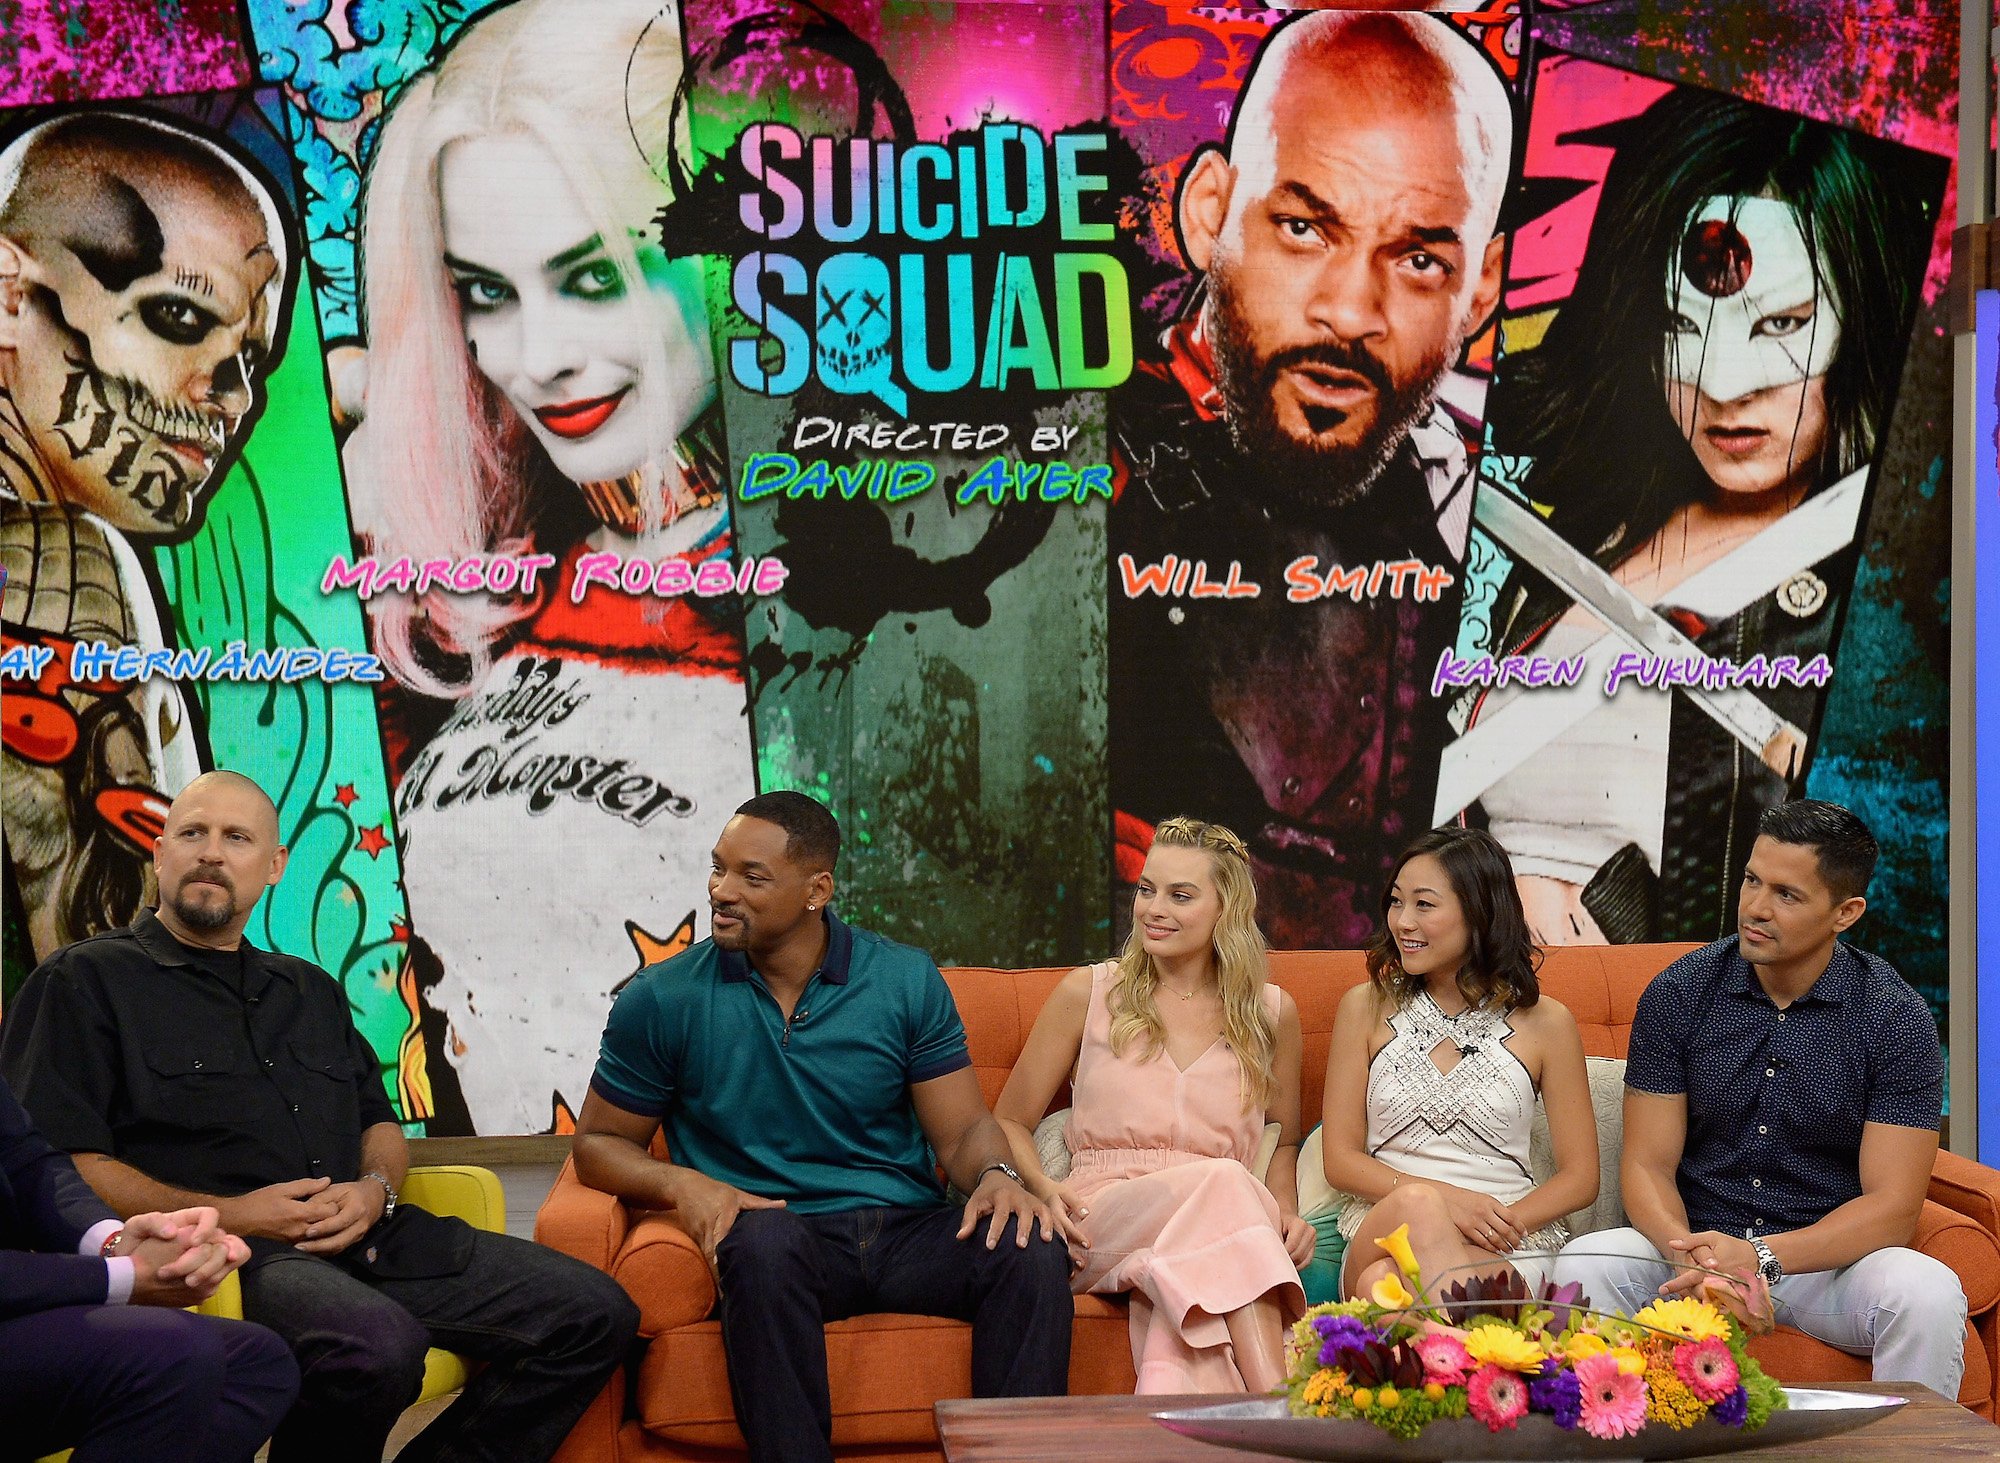 David Ayer, Will Smith, Margot Robbie, Karen Fukuhara and Jay Hernandez on the set of Univisions "Despierta America" for 'Suicide Squad' on July 25, 2016 